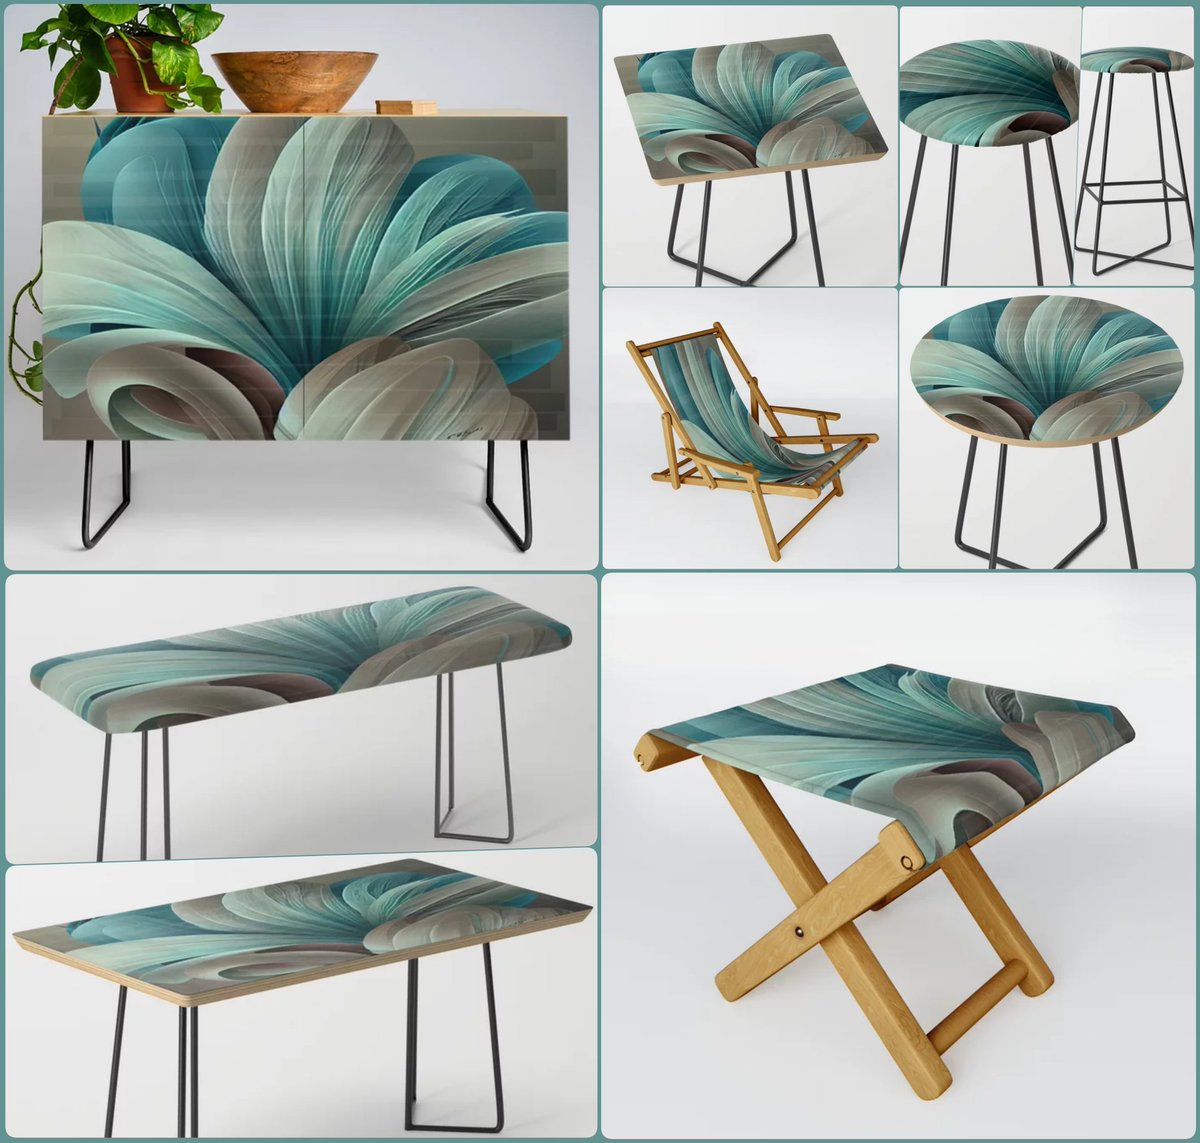 Tomorrows Journey Furniture~by Art Falaxy~
~Unique Home Decor~
#artfalaxy #art #furniture #tables #homedecor #society6 #modern #Society6max #accents #interior #trendy #credenza #dressers #stools #coffee

COLLECTION: society6.com/art/tomorrows-…